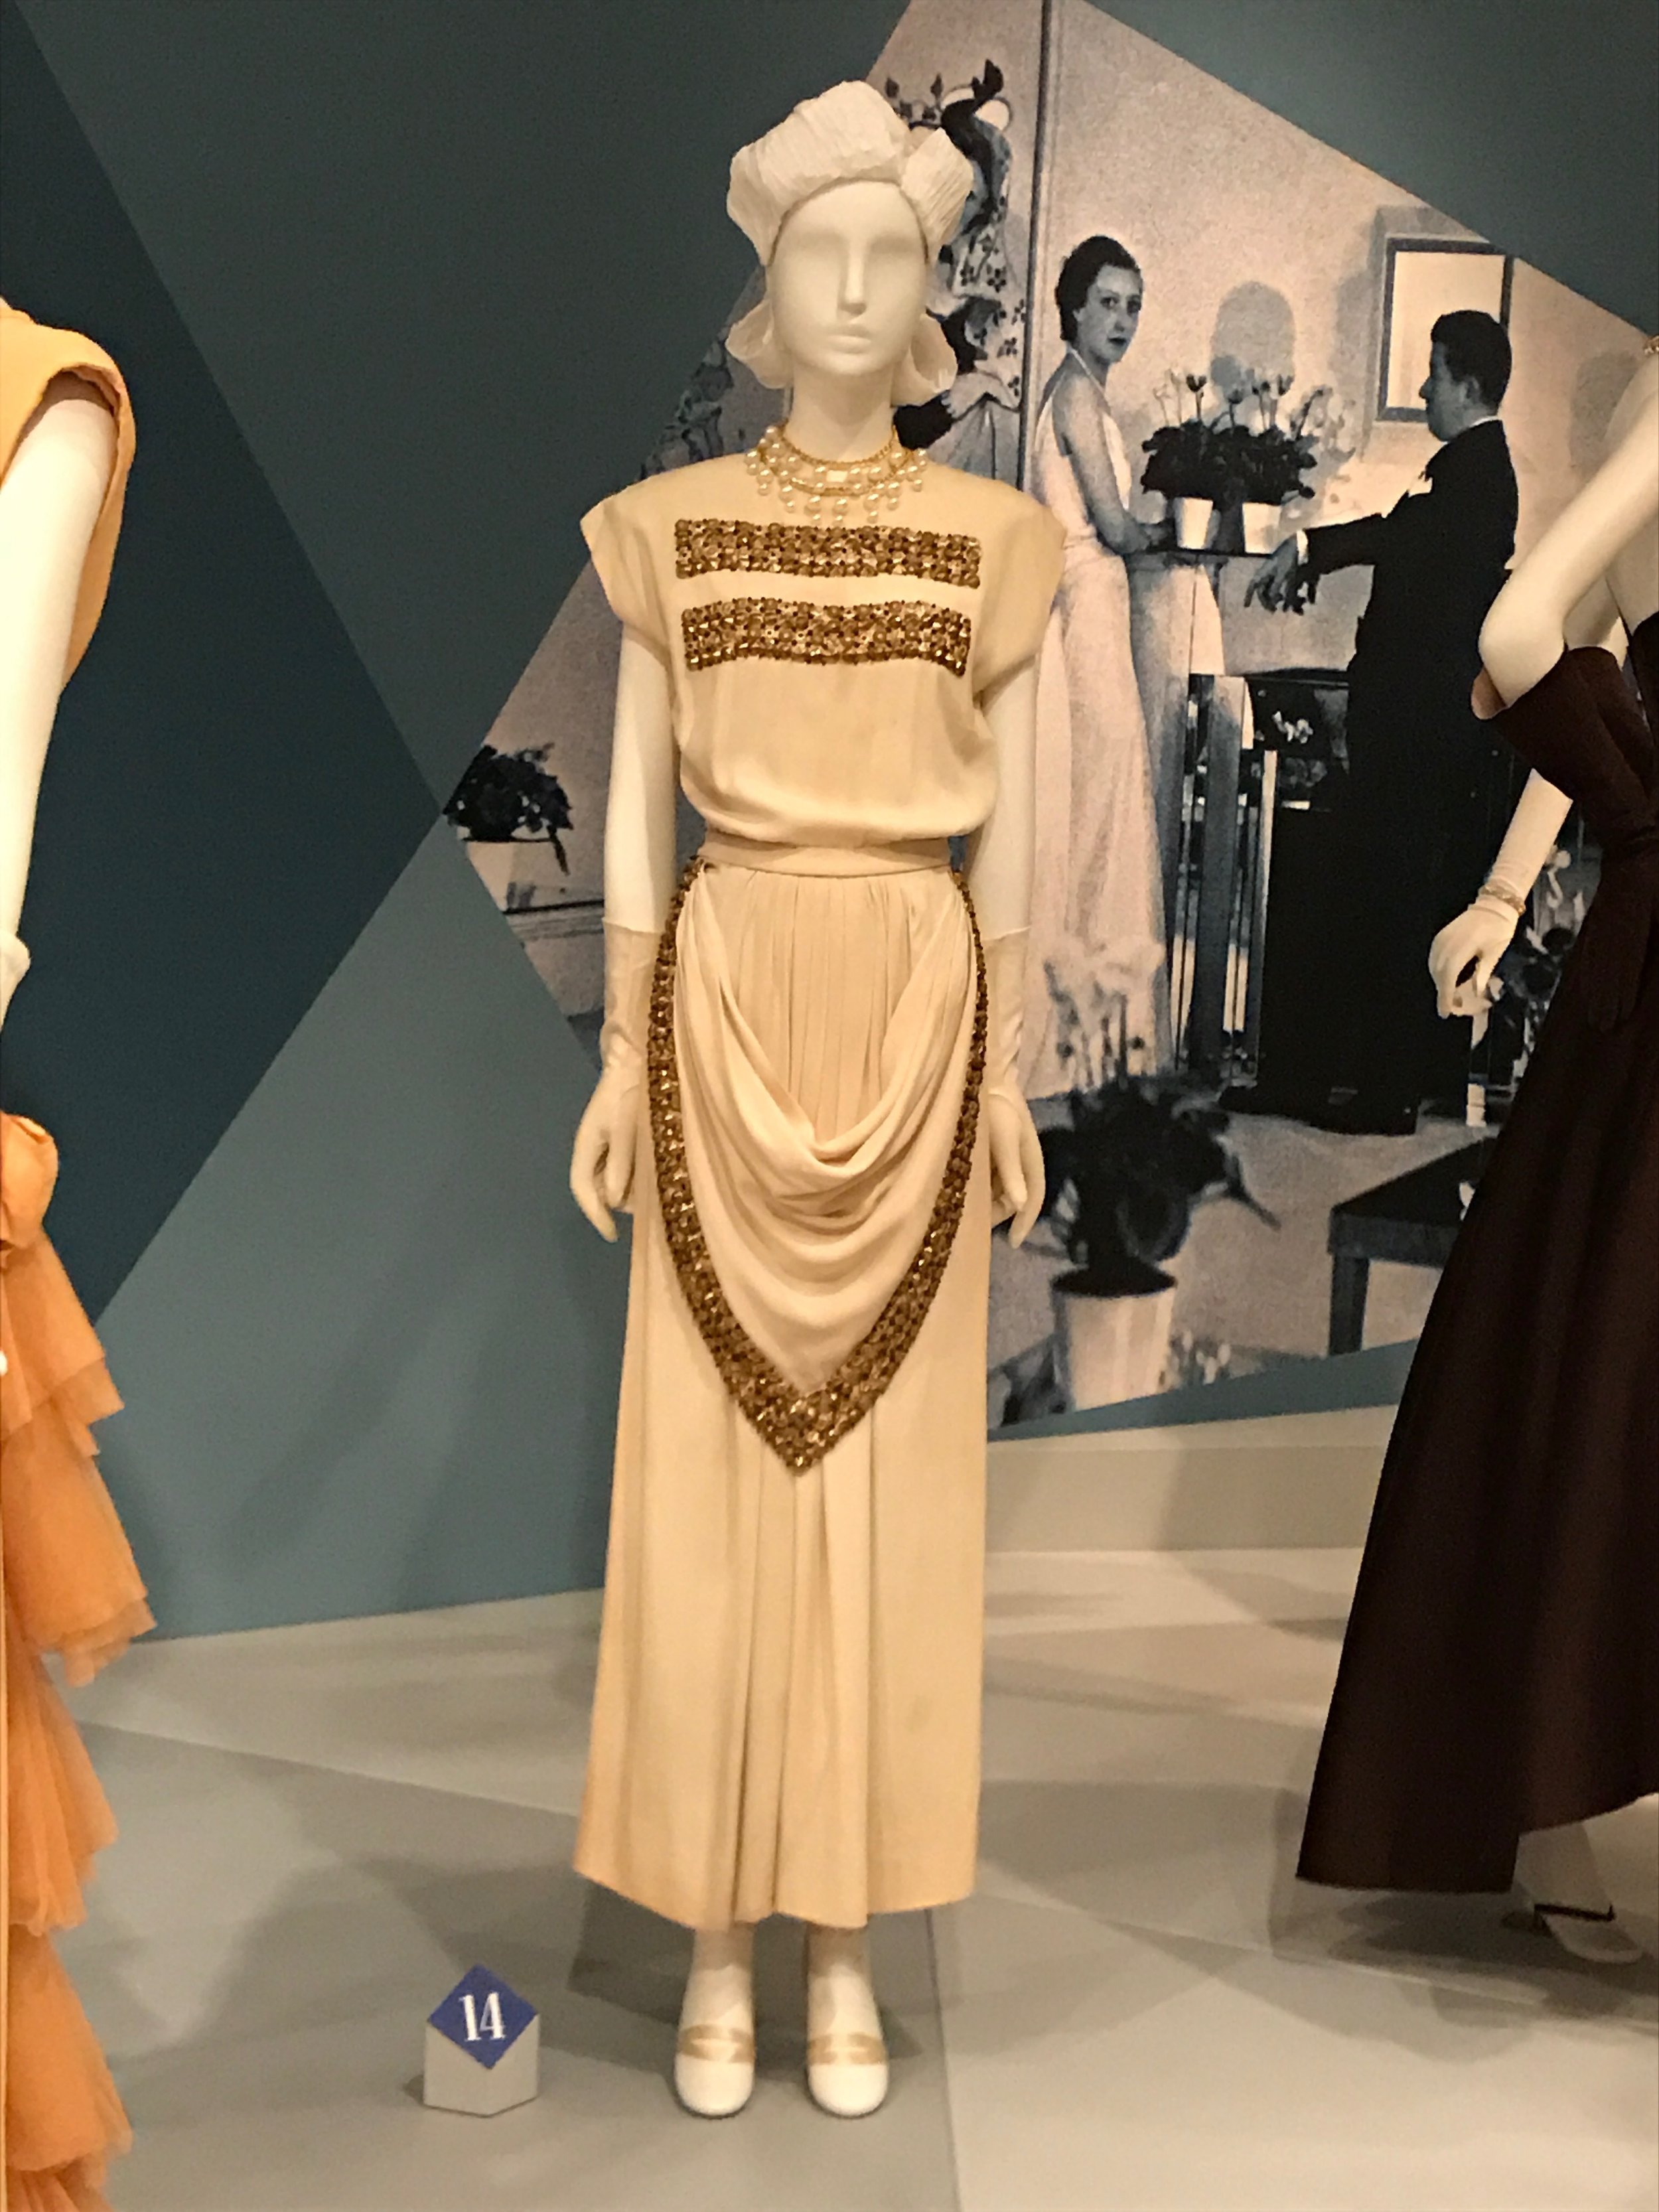  The restored dress, in all its glory 